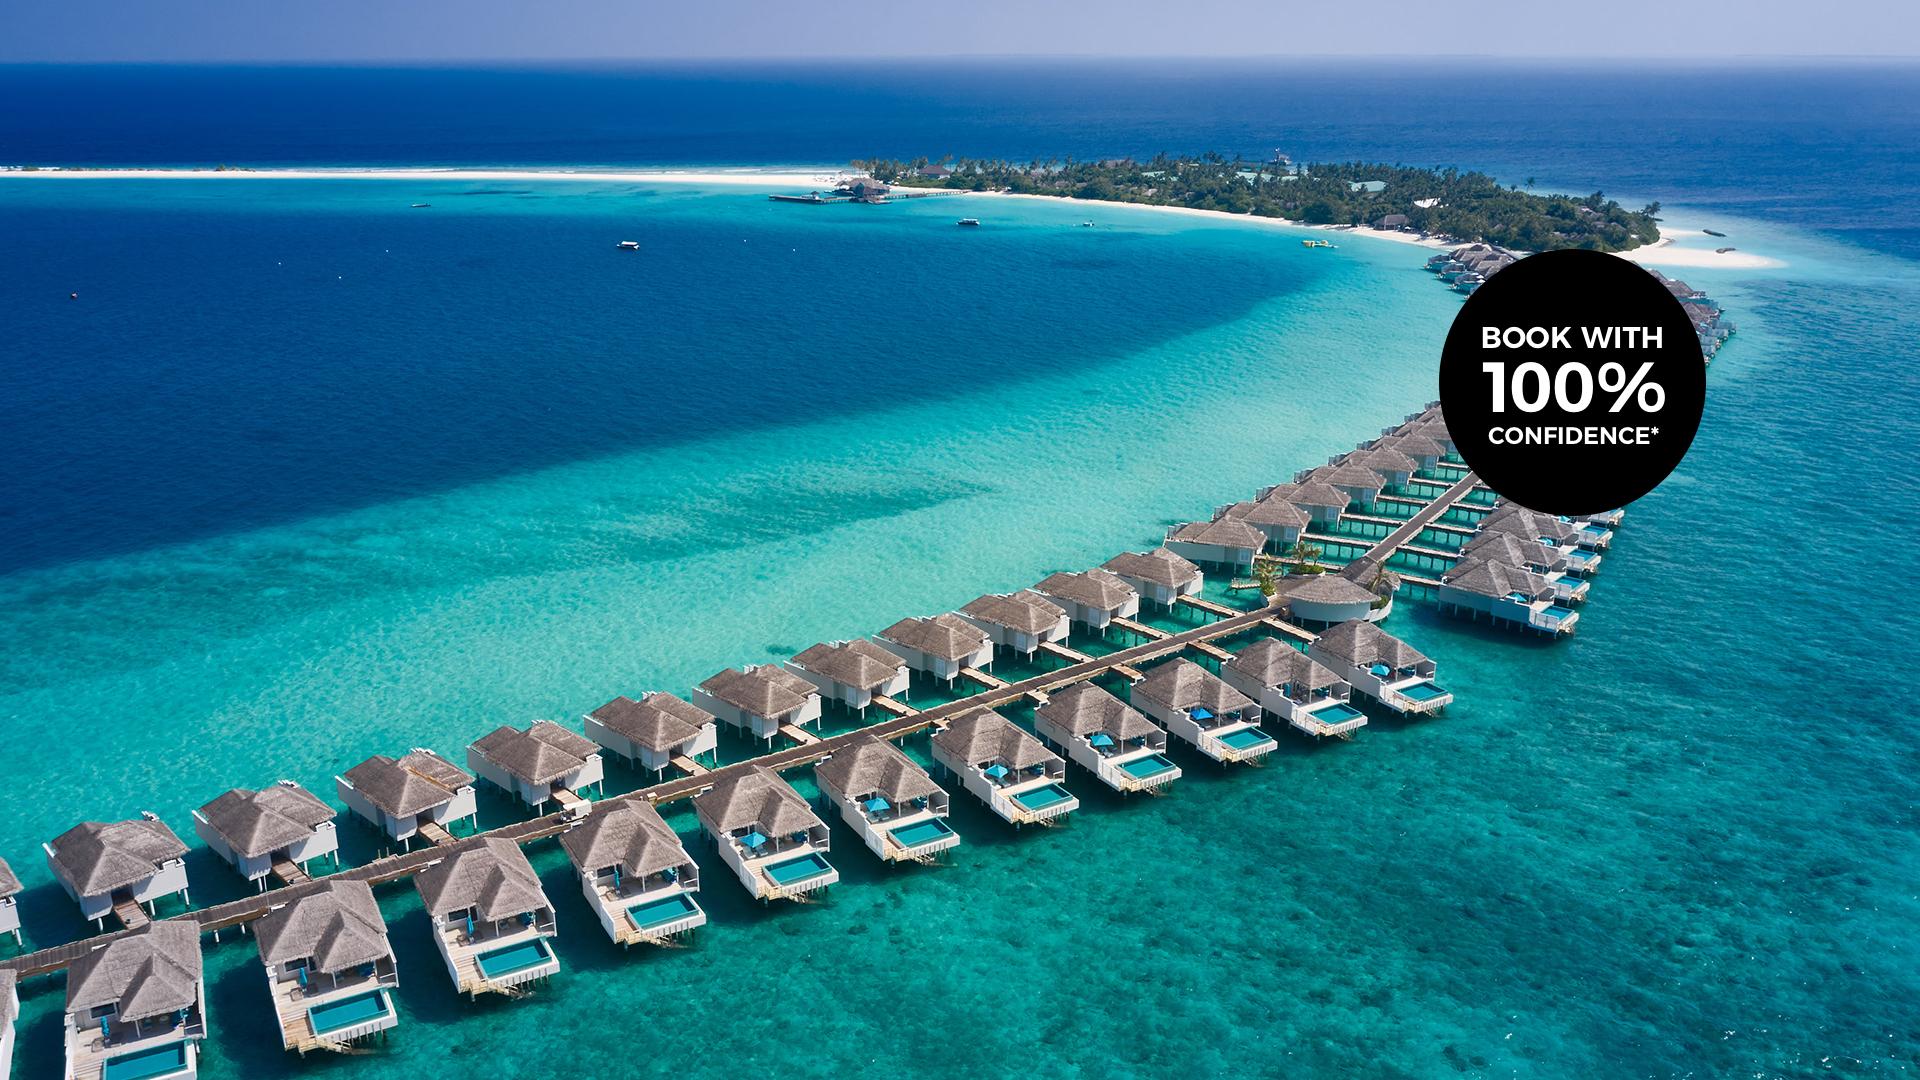 Maldives Holiday Packages 2021/2022 Hotel + Flight Deals Luxury